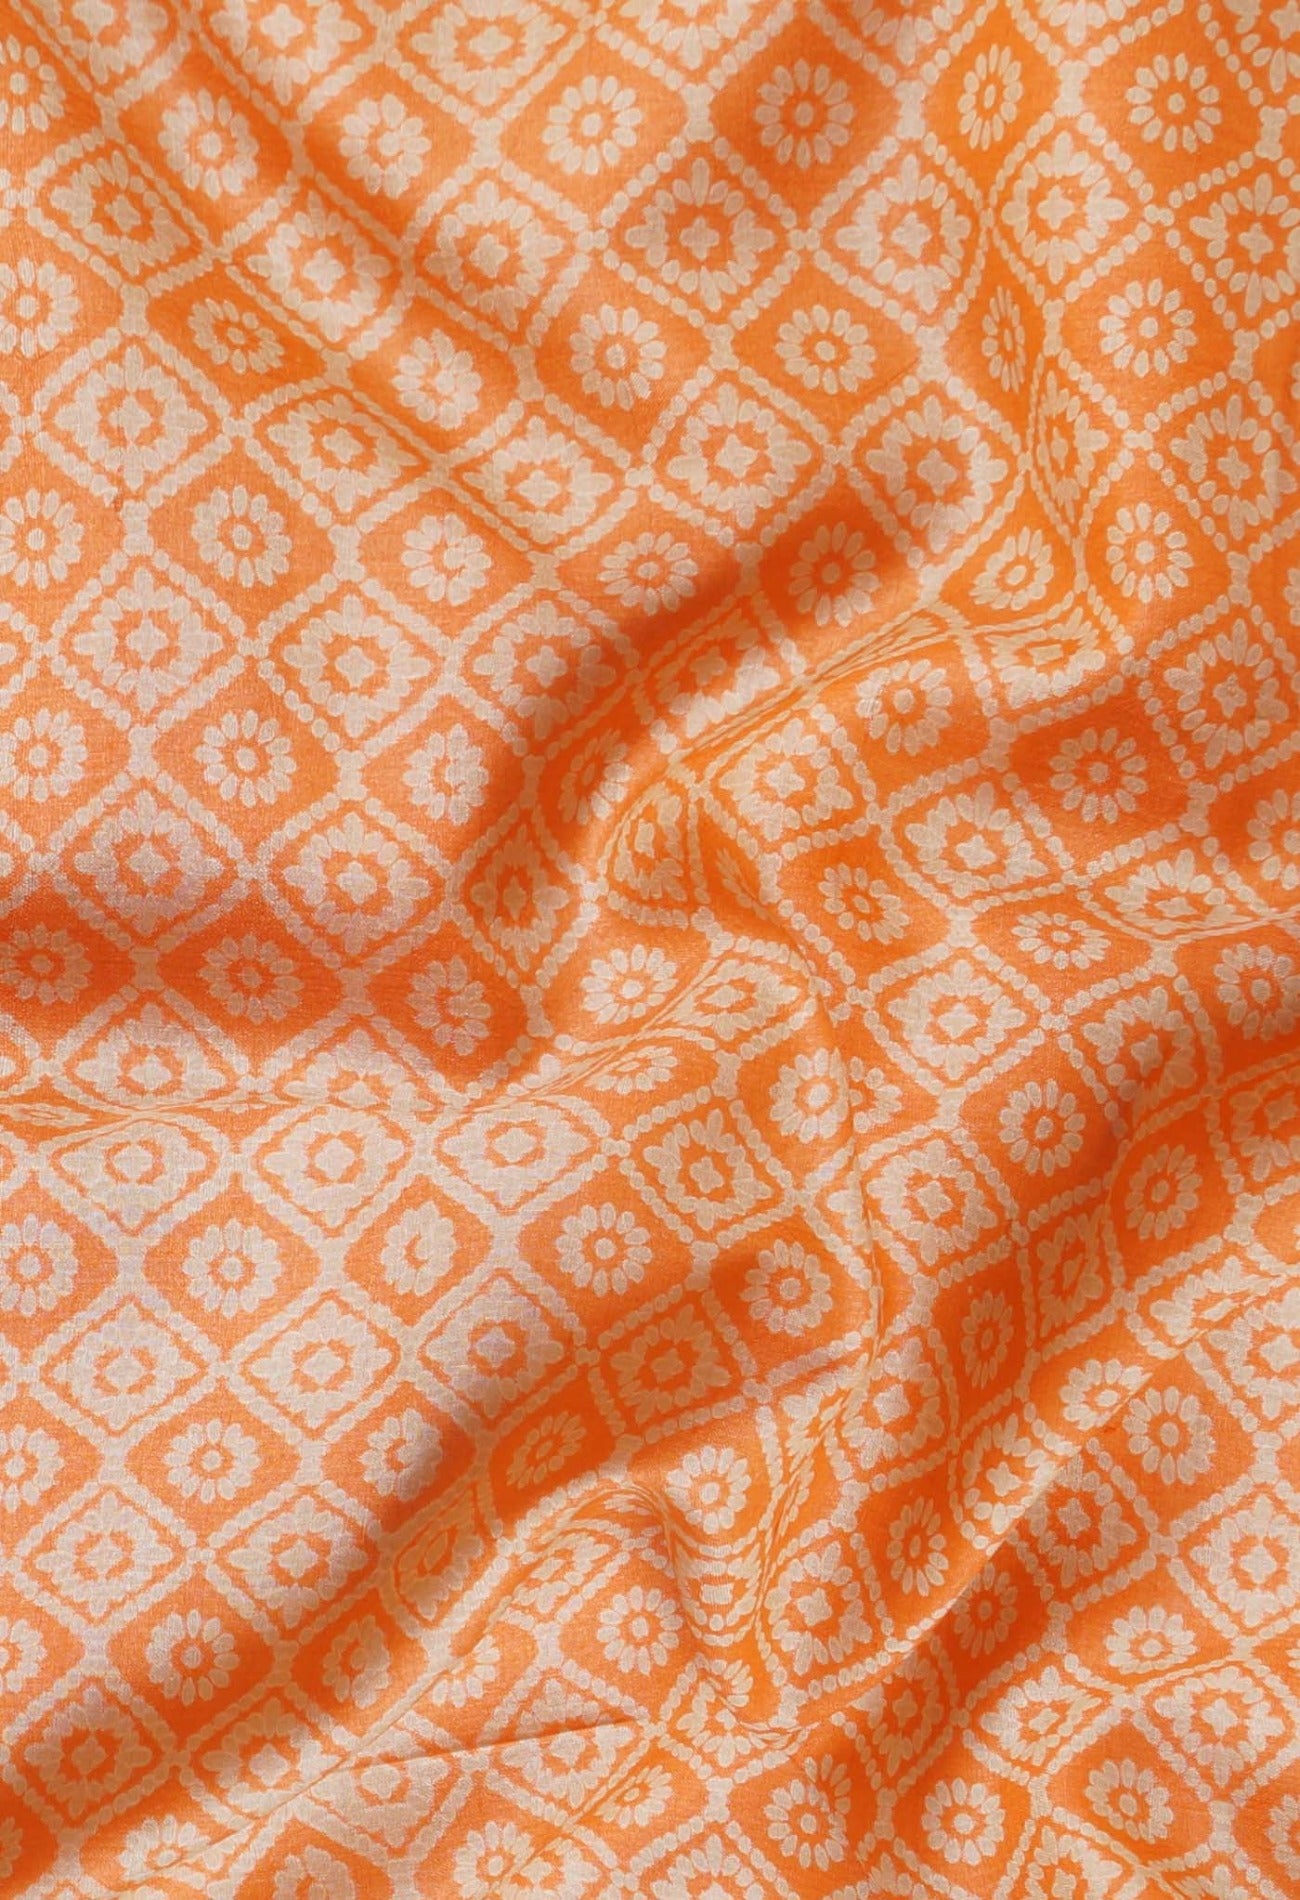 Online Shopping for Orange Pure Handloom Bengal Tussar Silk Saree with Hand Block Prints from West Bengal at Unnatisilks.comIndia
